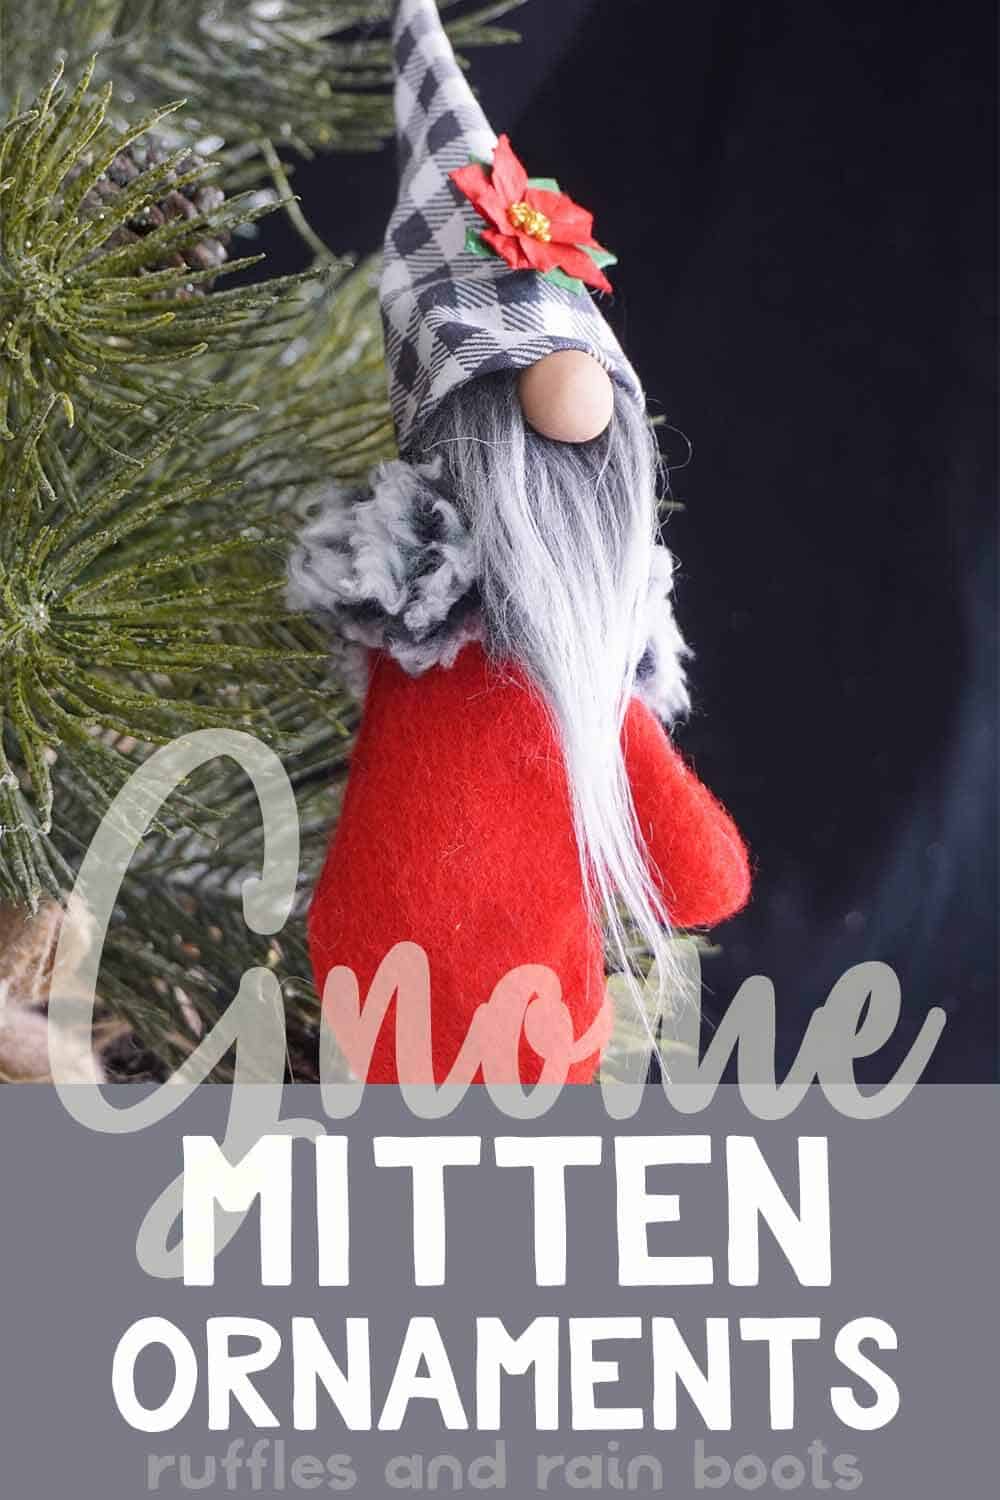 closeup of gnome in a mitten for a christmas ornament with text which reads gnome mitten ornaments